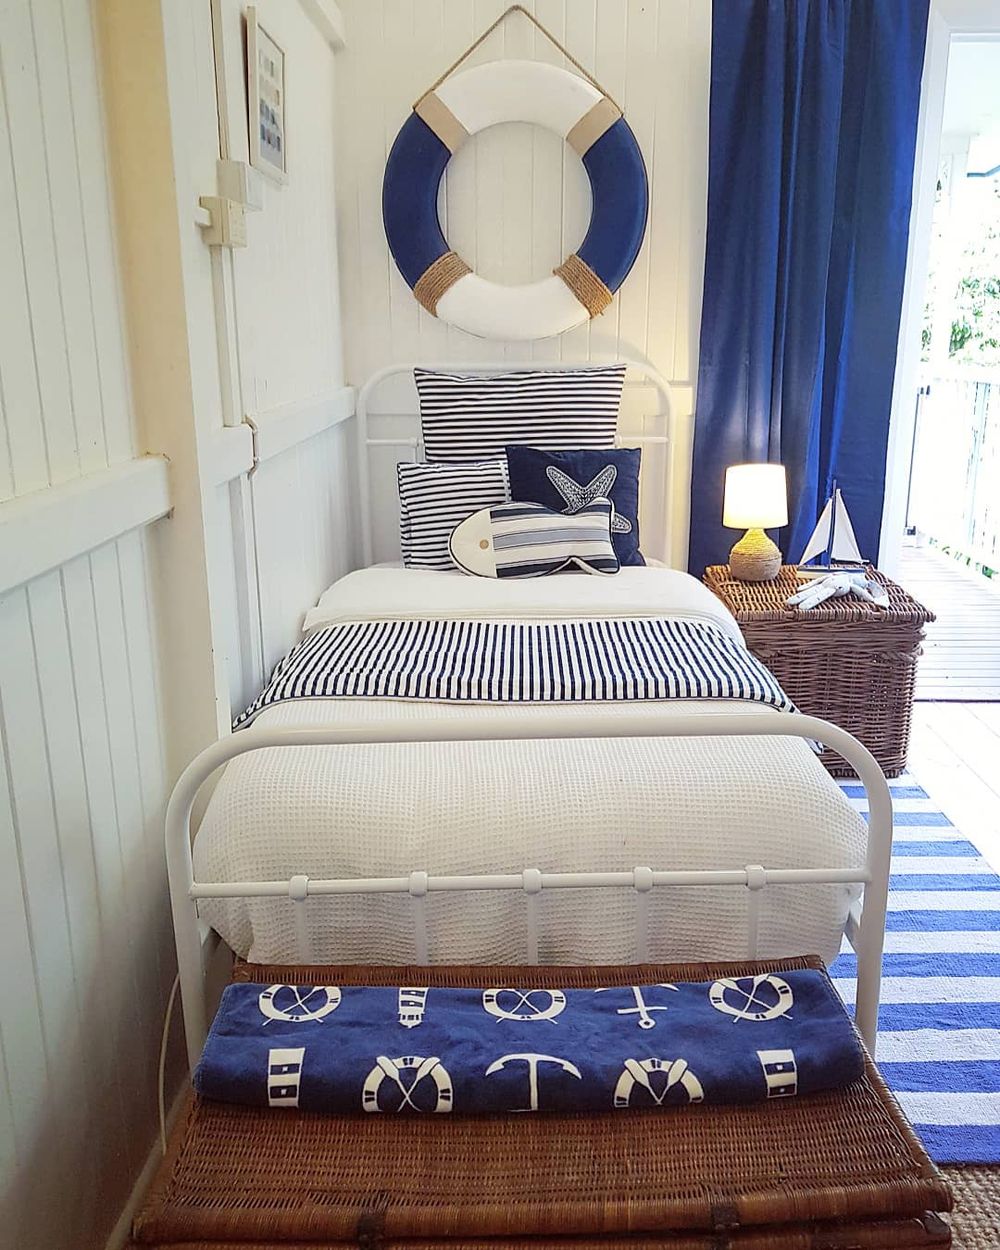 Nautical Bedroom Ideas Life Ring Above Bed on Wall @plantation_house_